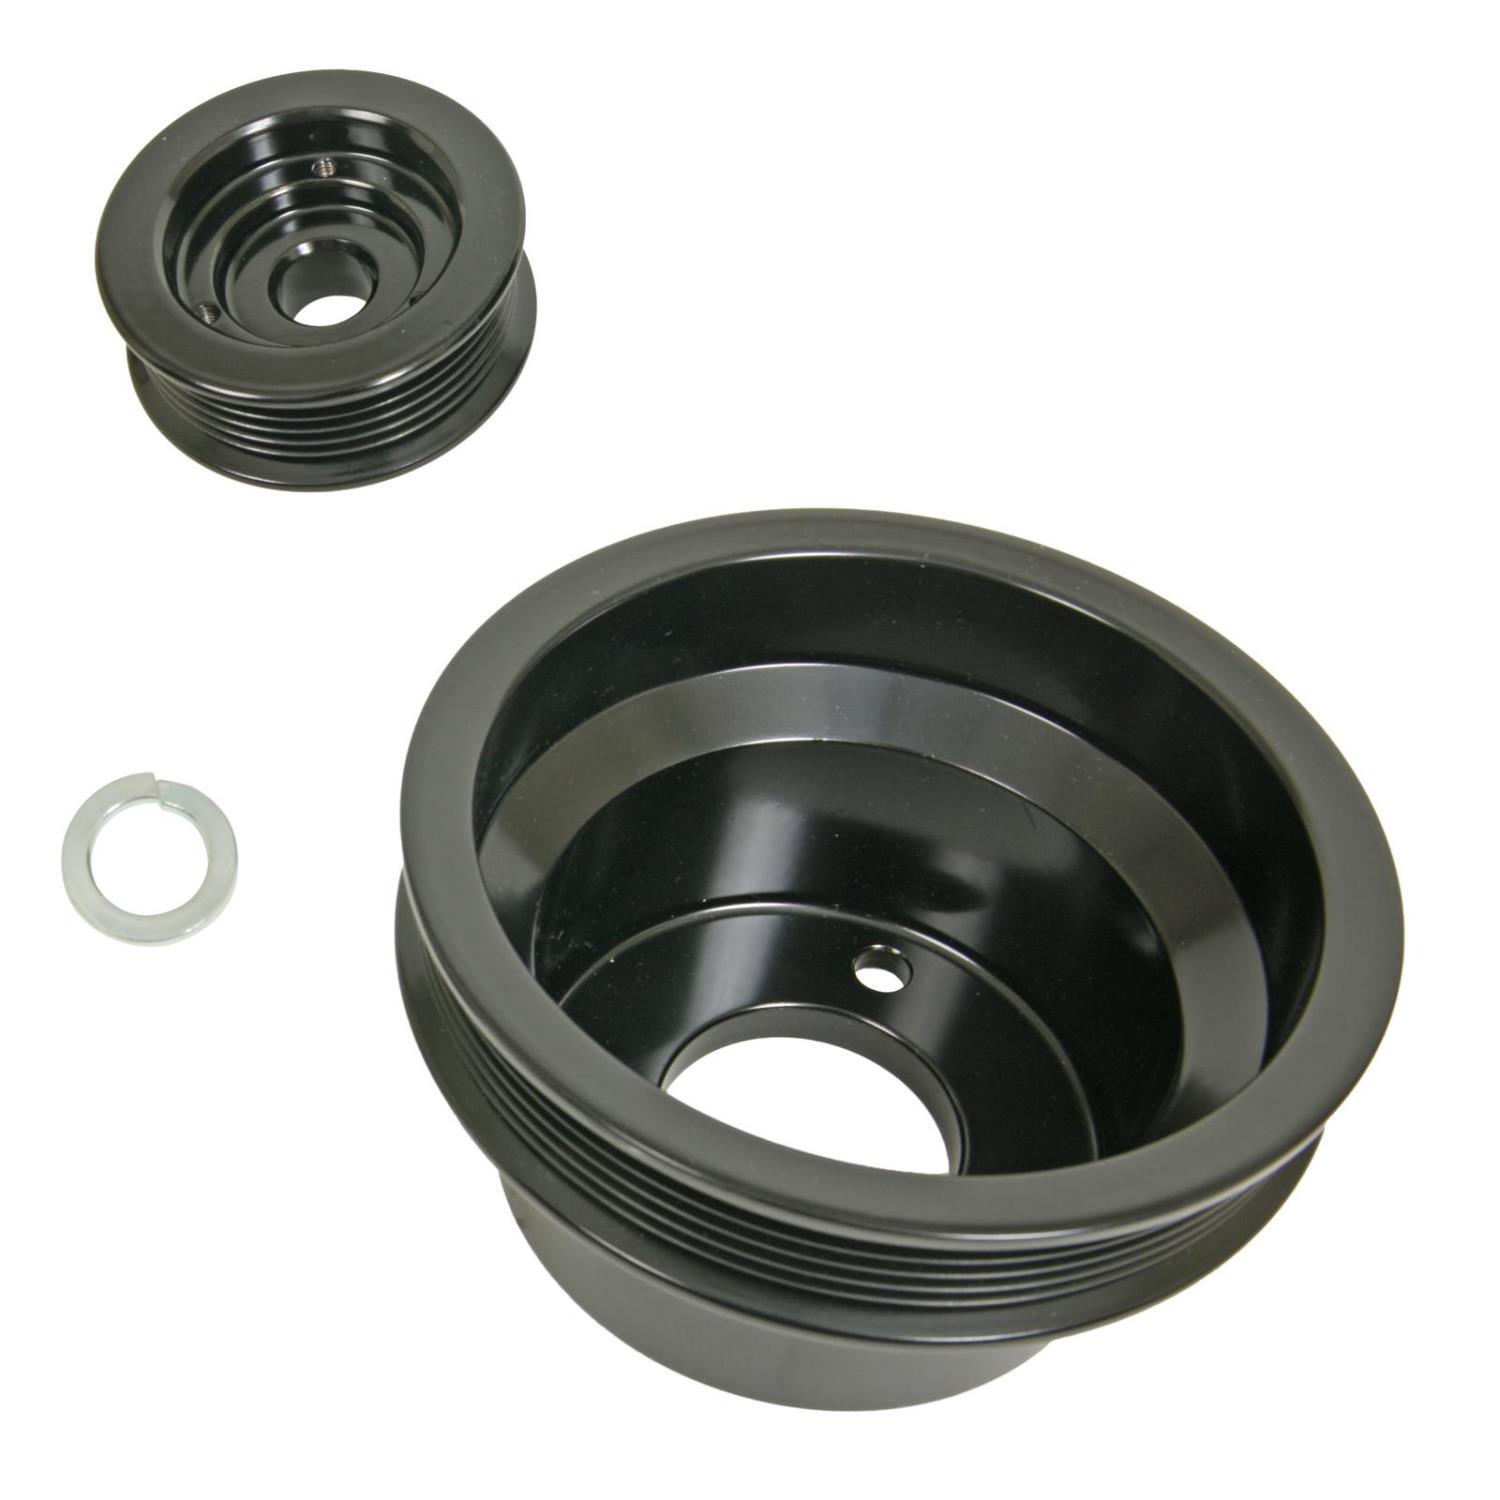 CHEVY TRK 454 88-95 PERF 2PC PULLEY BLK KIT